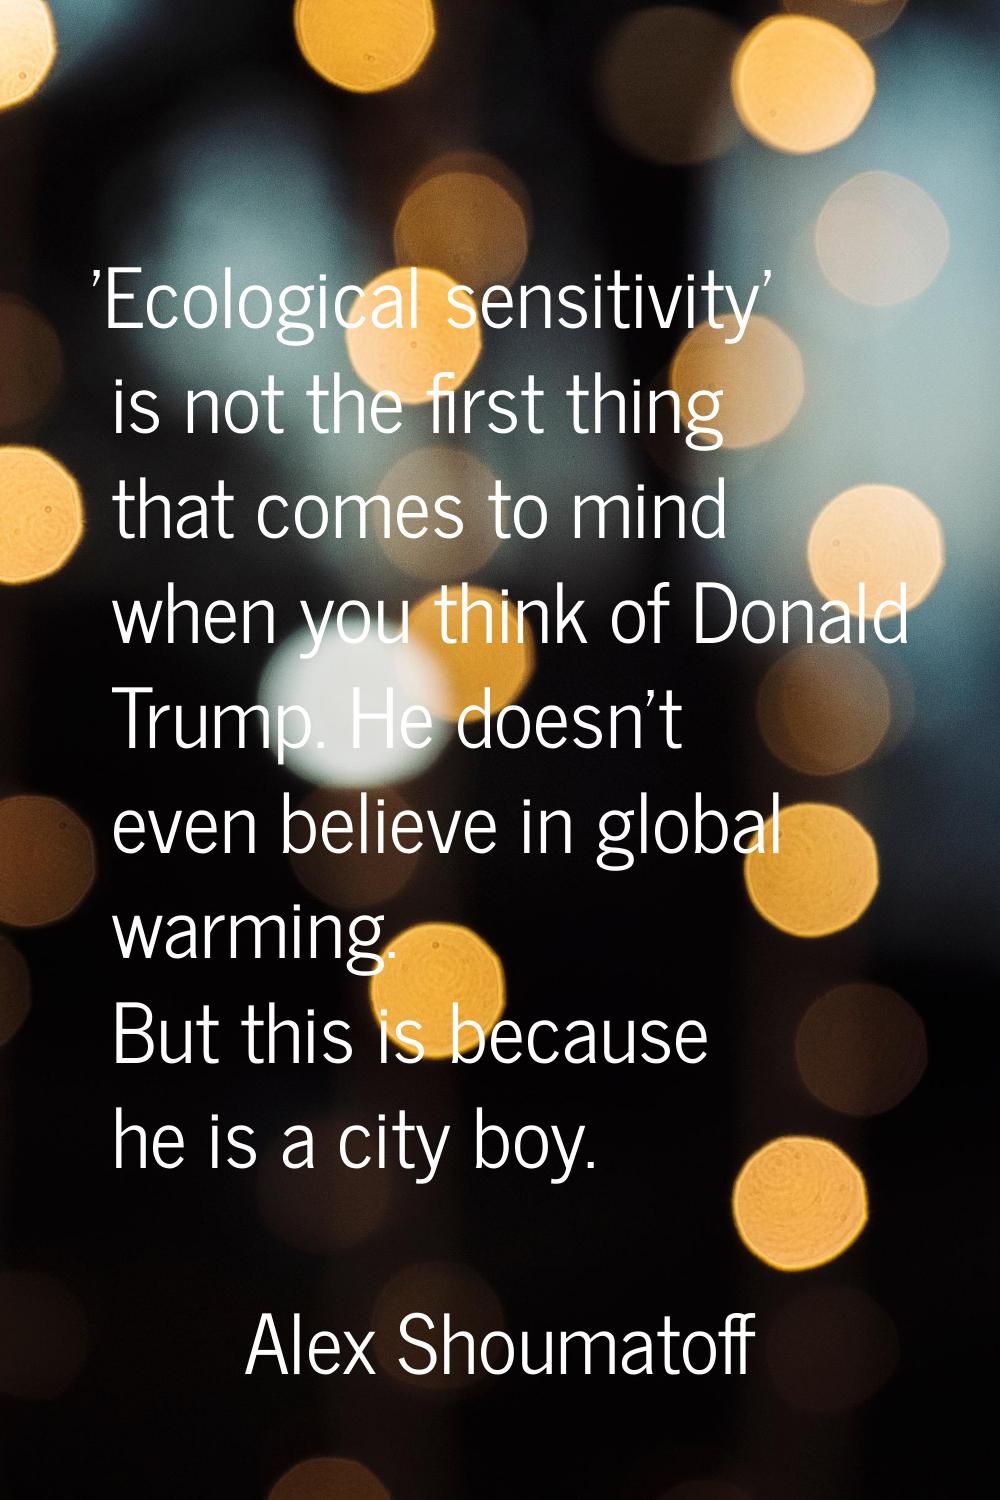 'Ecological sensitivity' is not the first thing that comes to mind when you think of Donald Trump. 